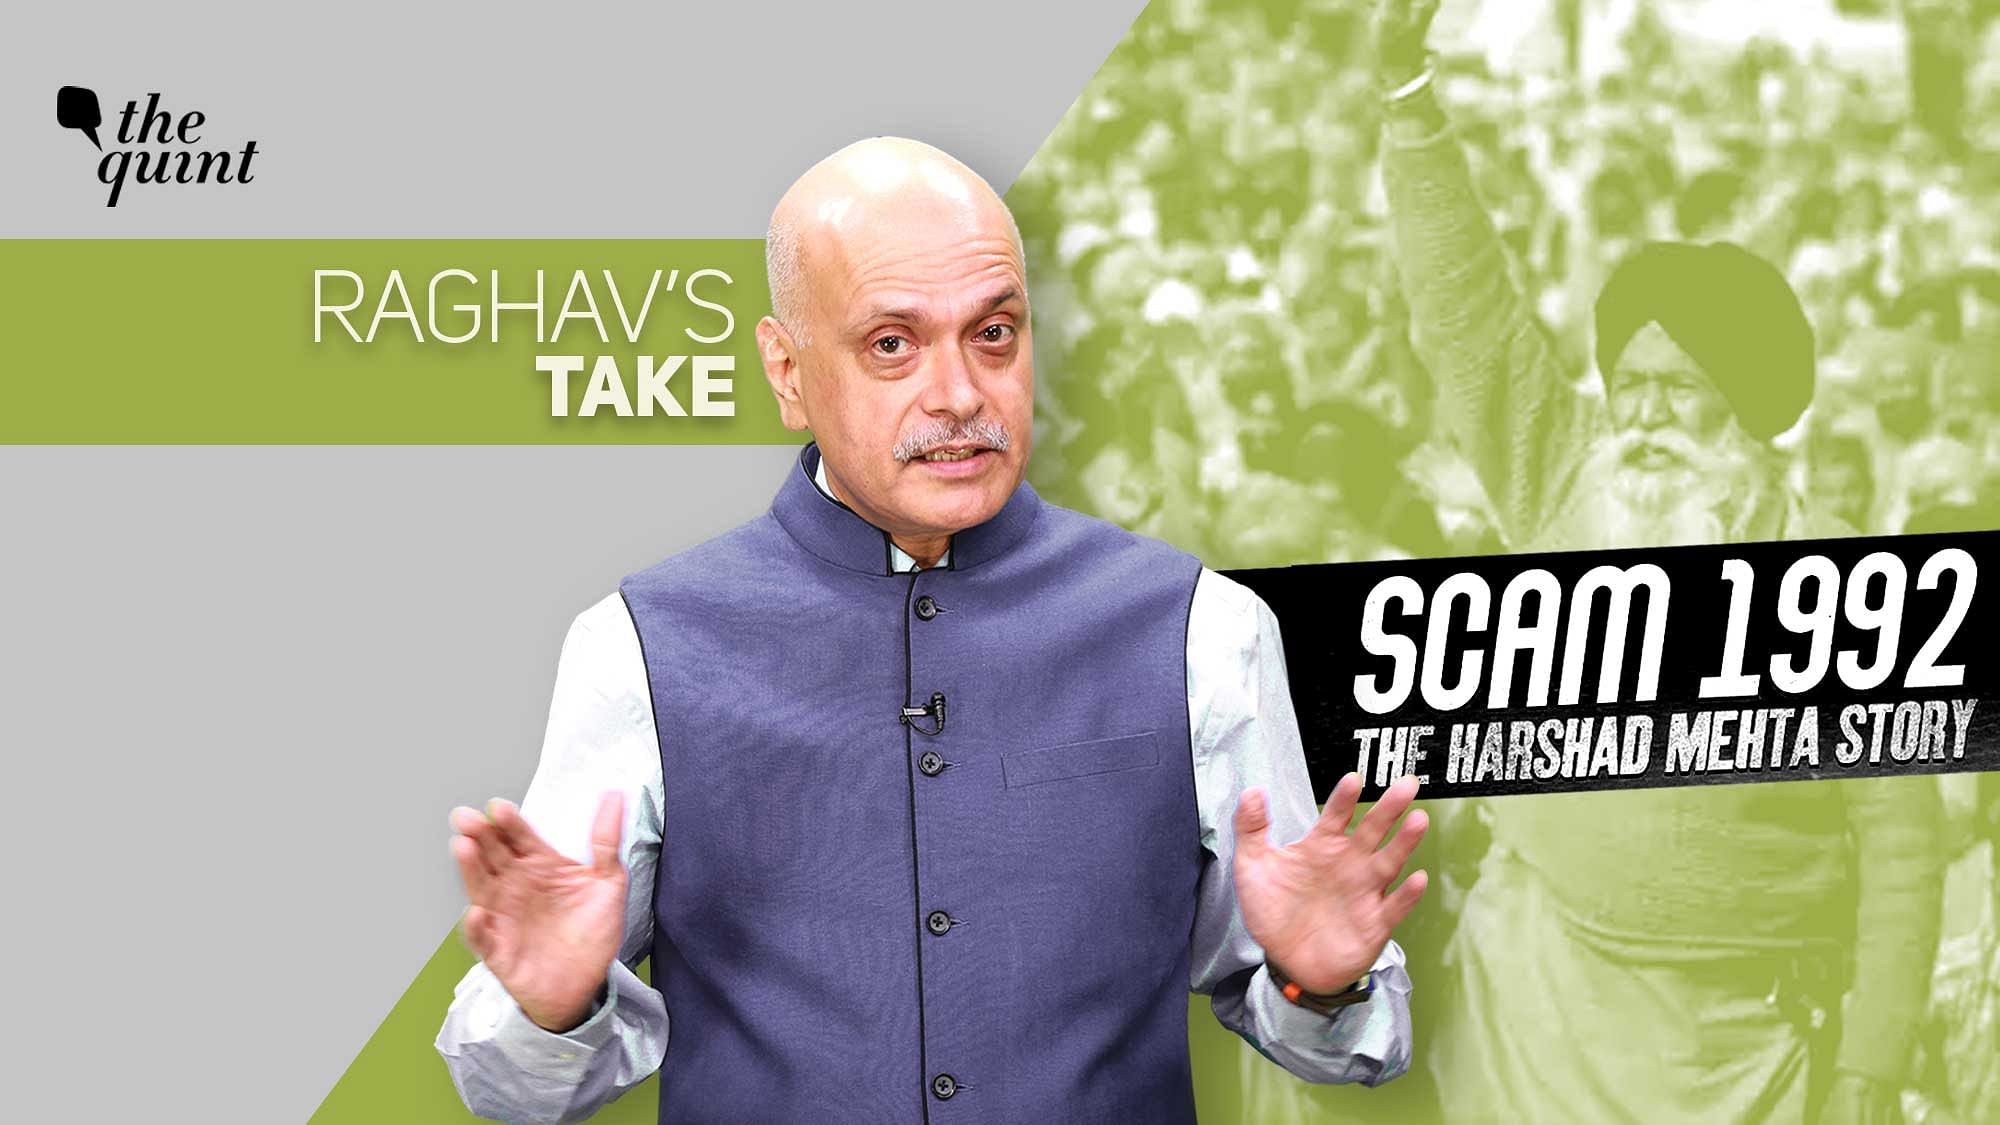 Image of The Quint’s Founder-Editor Raghav Bahl, snippet of the 2020 farm protests, and a snippet from the poster of web series ‘Scam 1992: The Harshad Mehta’ story – used for representational purposes.